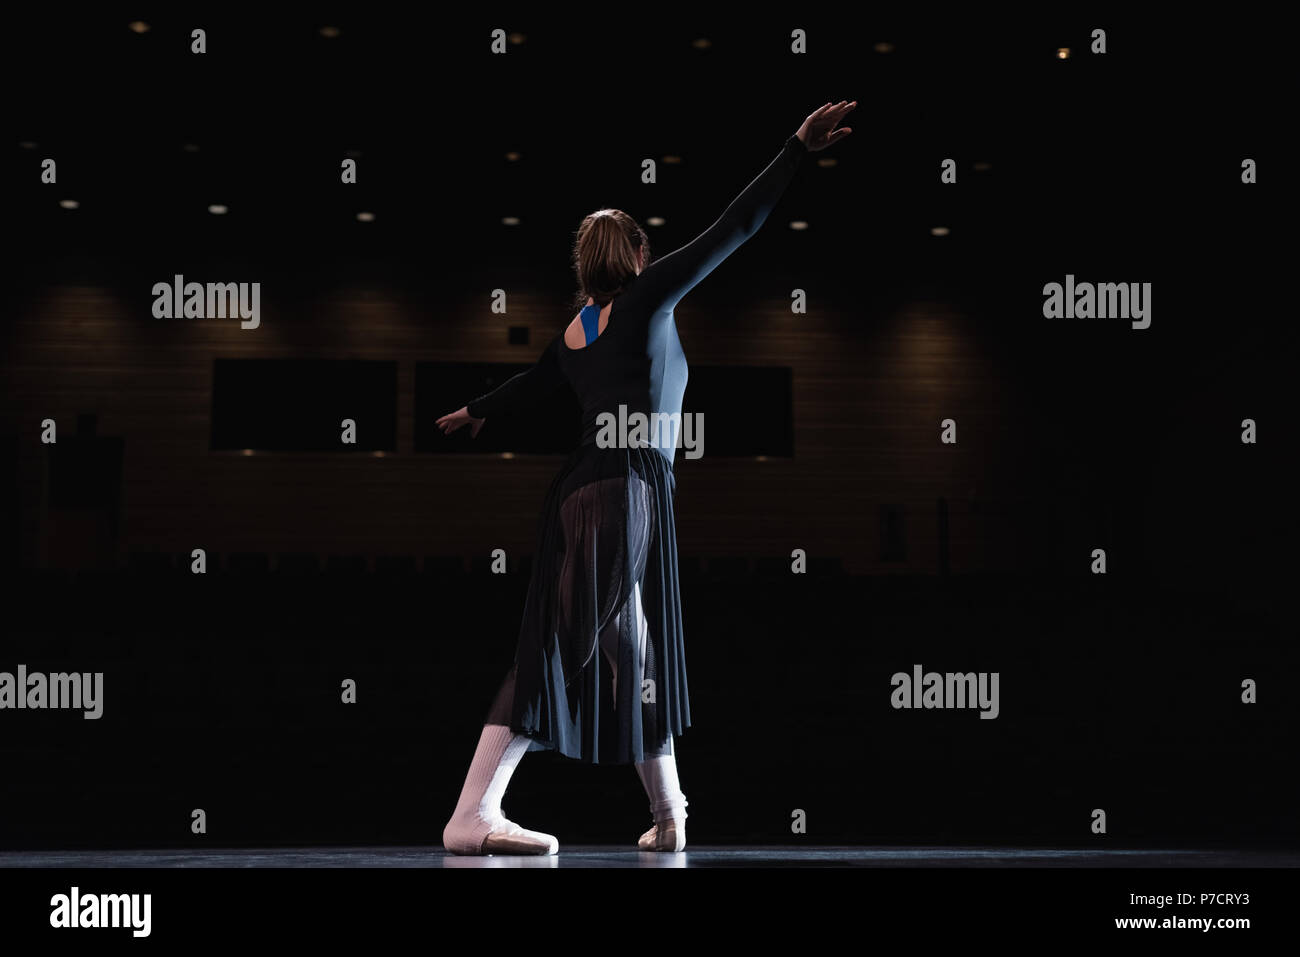 Ballet dancer dancing on stage Stock Photo